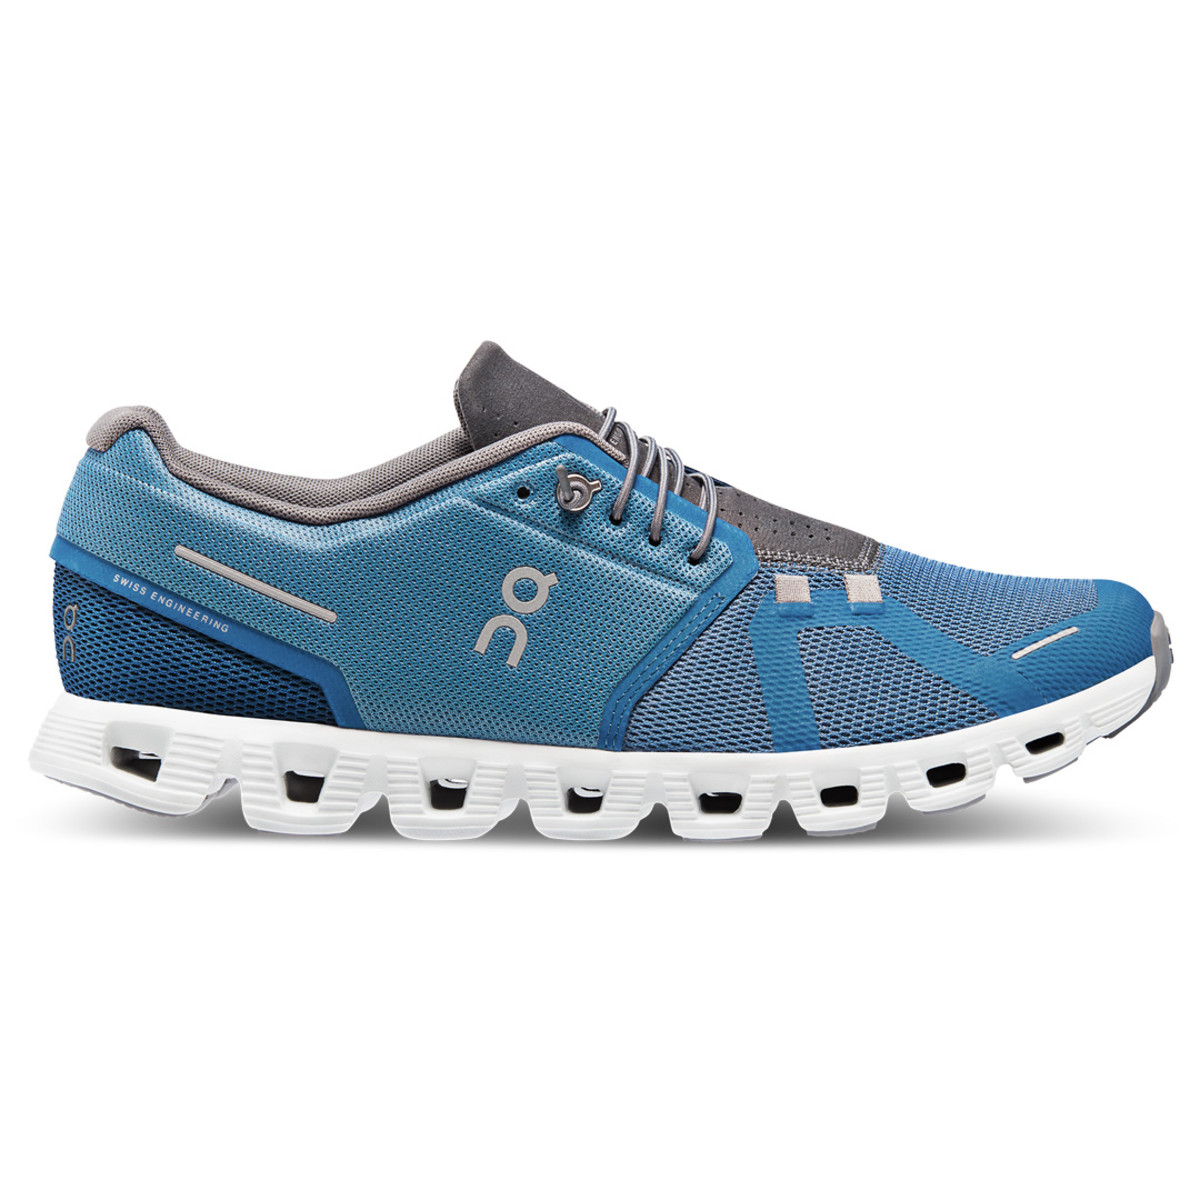 The On Cloud 5 for Men Is Now 30% Off In Select Colors - Men's Journal